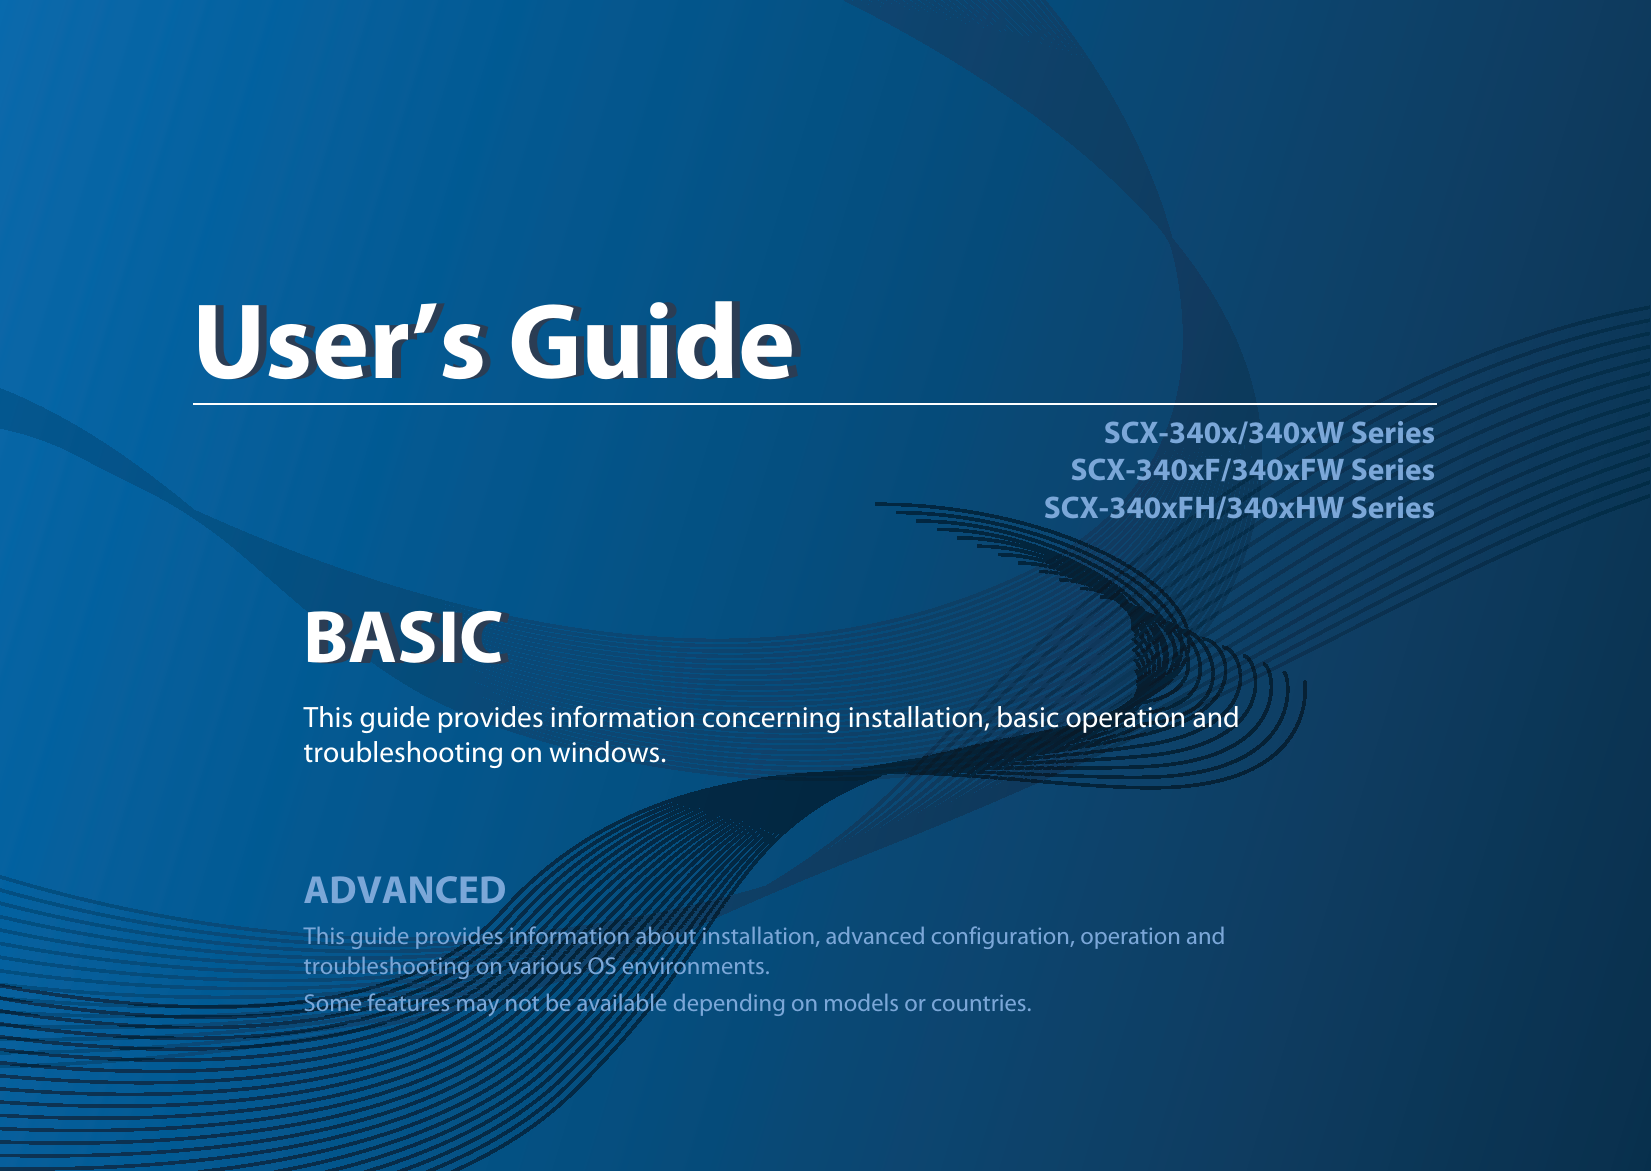 BASICUser’s GuideSCX-340x/340xW SeriesSCX-340xF/340xFW SeriesSCX-340xFH/340xHW SeriesBASICUser’s GuideThis guide provides information concerning installation, basic operation and troubleshooting on windows.ADVANCEDThis guide provides information about installation, advanced configuration, operation and troubleshooting on various OS environments. Some features may not be available depending on models or countries.